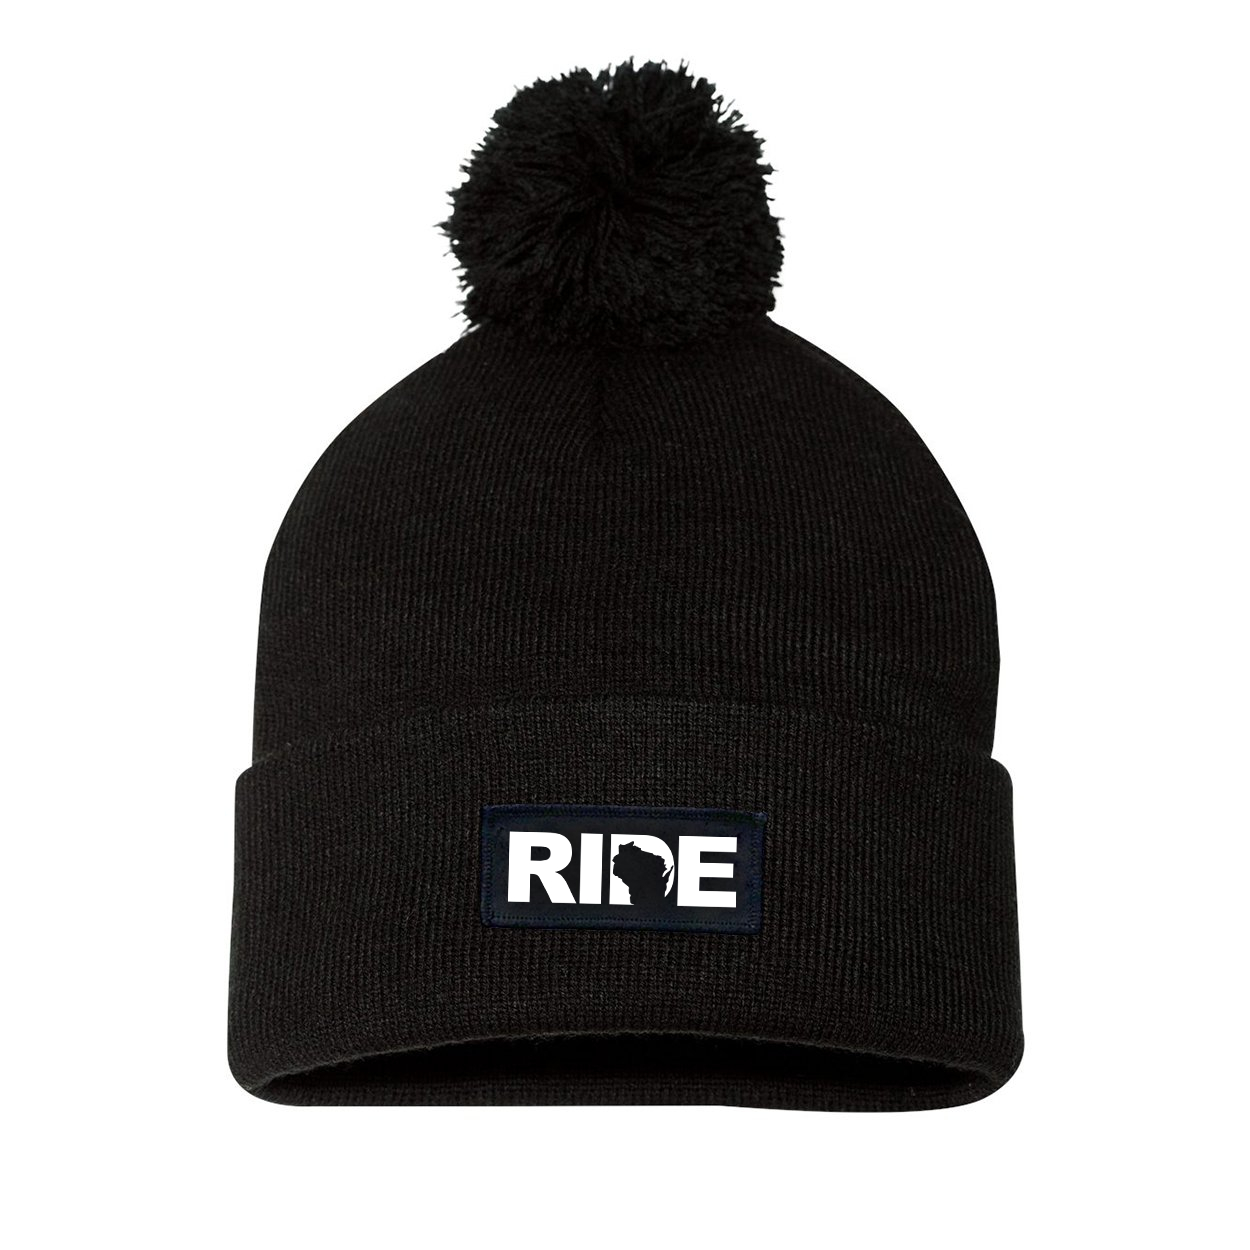 Ride Wisconsin Night Out Woven Patch Roll Up Pom Knit Beanie Black (White Logo)